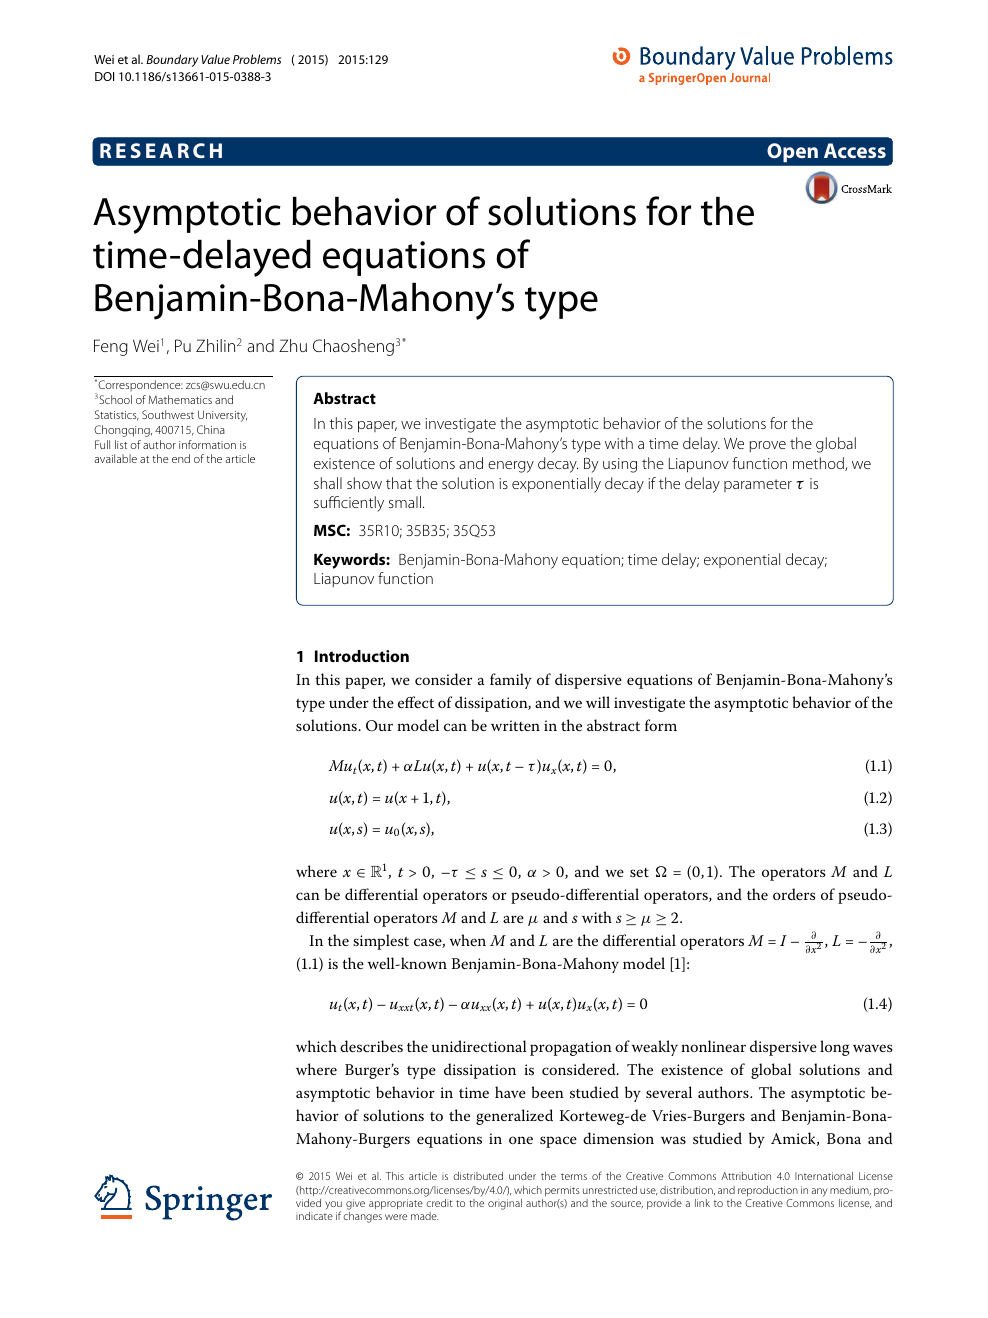 Asymptotic Behavior Of Solutions For The Time Delayed Equations Of Benjamin Bona Mahony S Type Topic Of Research Paper In Mathematics Download Scholarly Article Pdf And Read For Free On Cyberleninka Open Science Hub